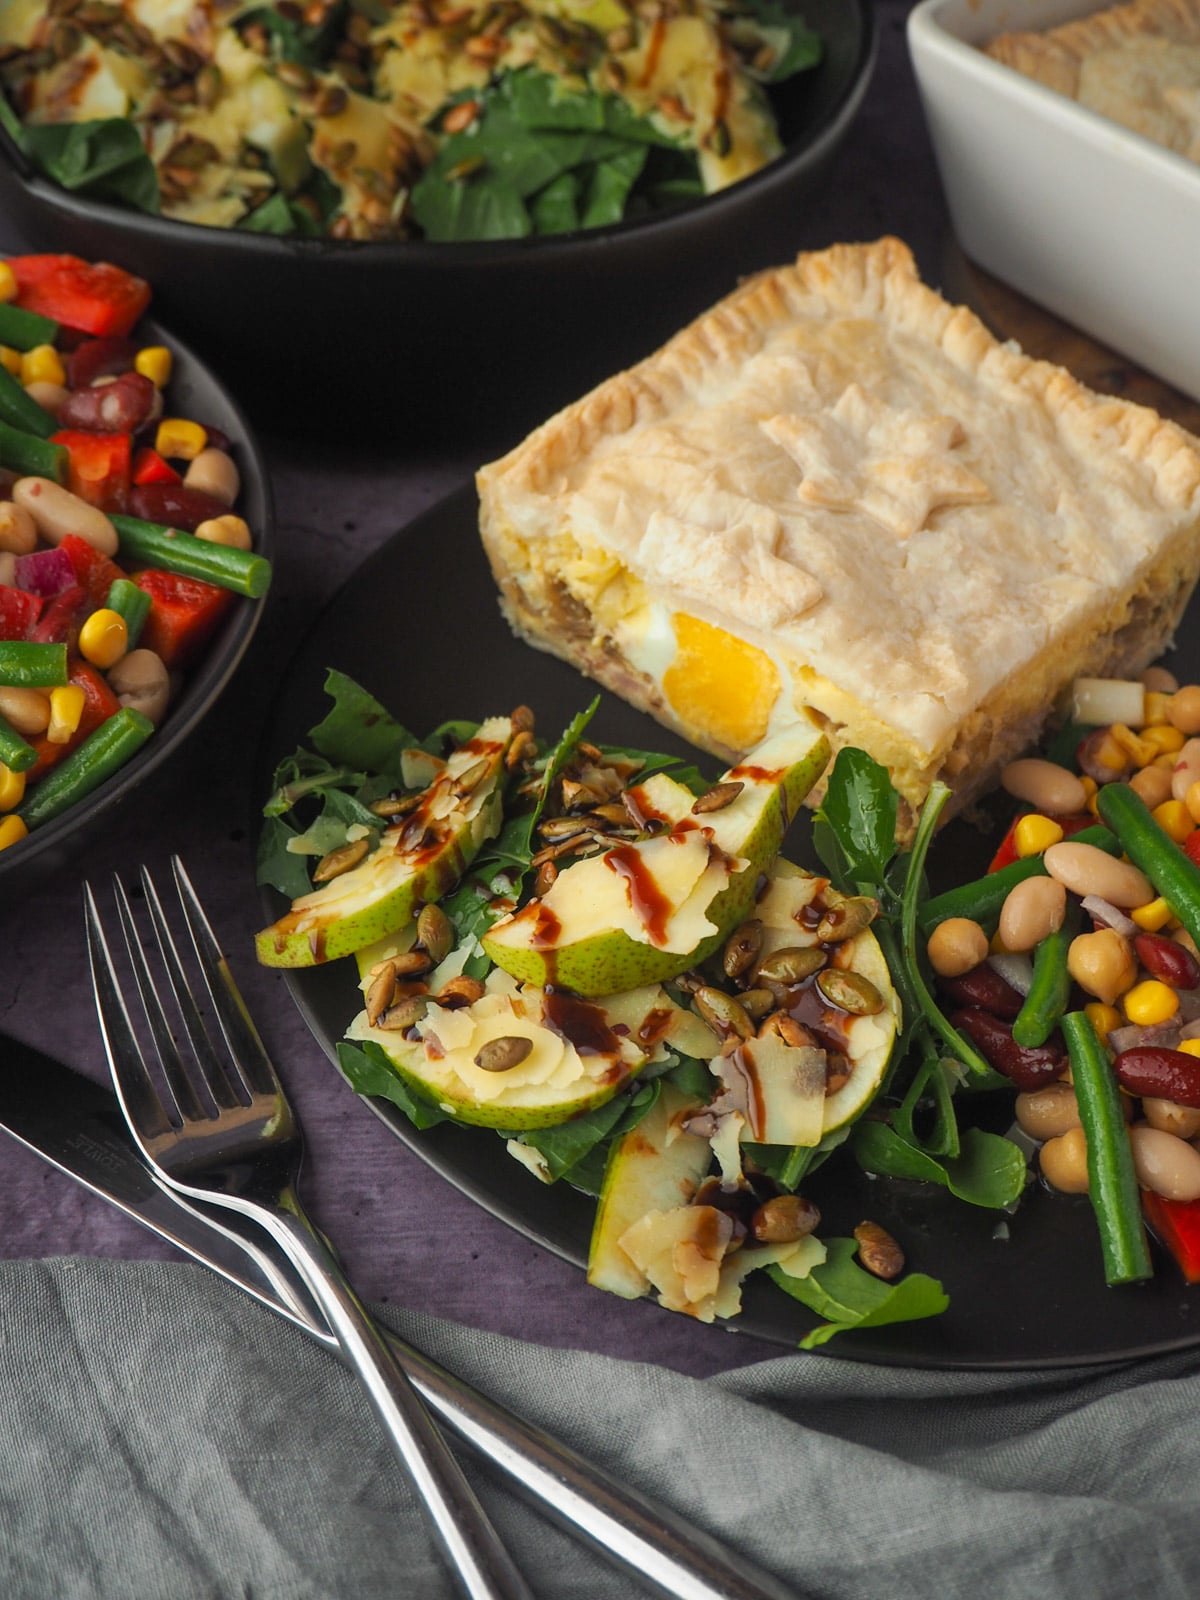 Serving of salad on a plate with bacon and egg pie and four bean salad, knife and fork to the side and salads and pie in the background.